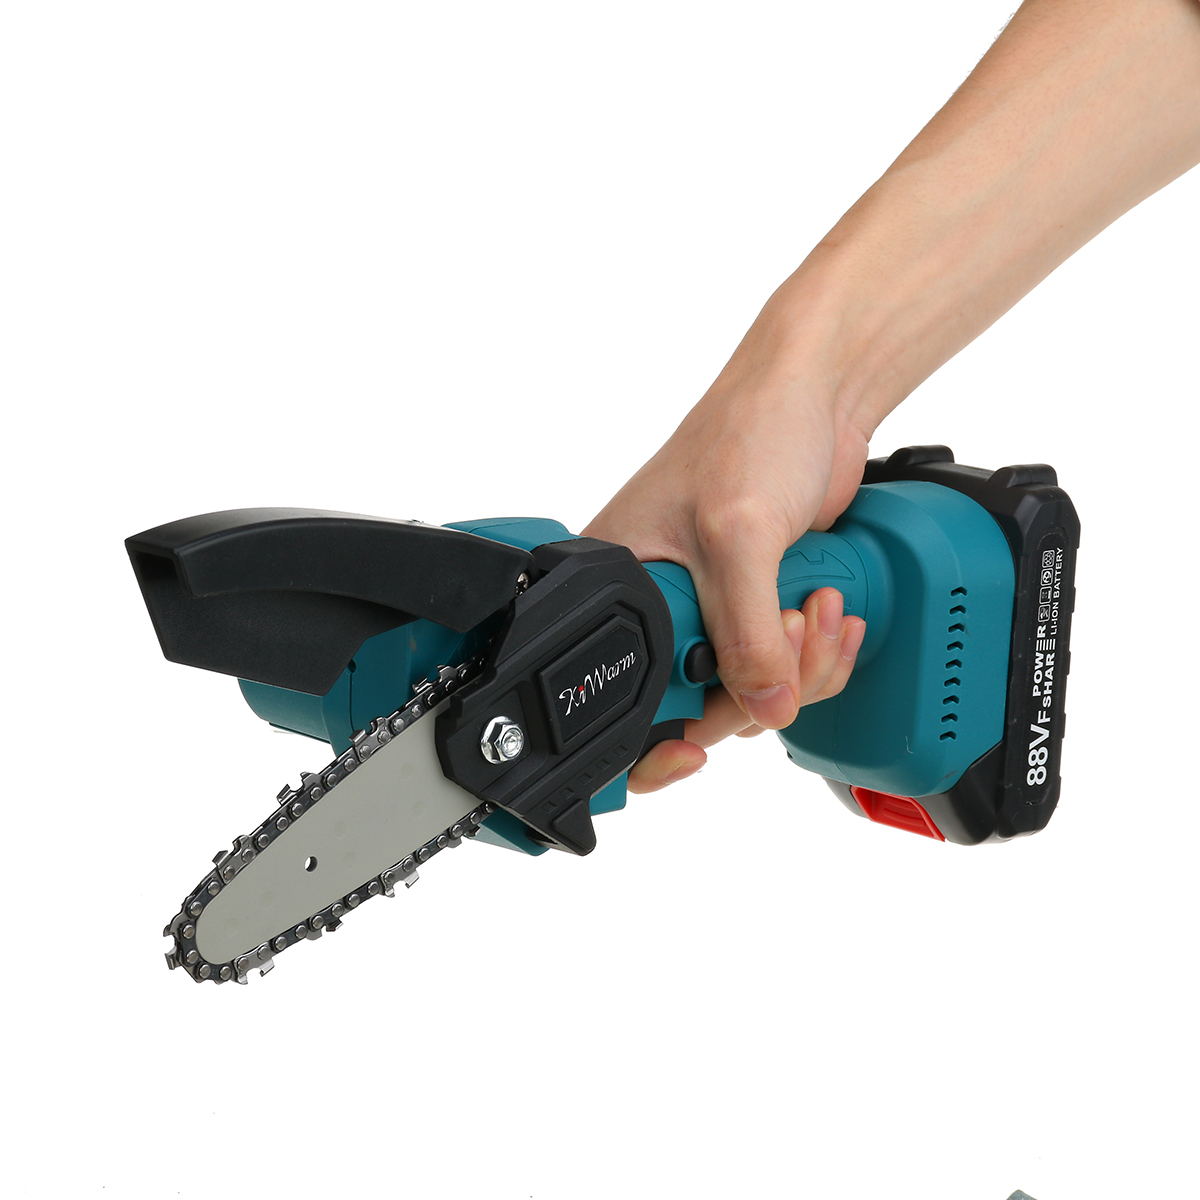 800W-4-Inch-Handheld-Cordless-Chainsaw-Motor-Chainsaw-Chainsaw-Saw-Blade-One-Handed-Saw-1827985-11